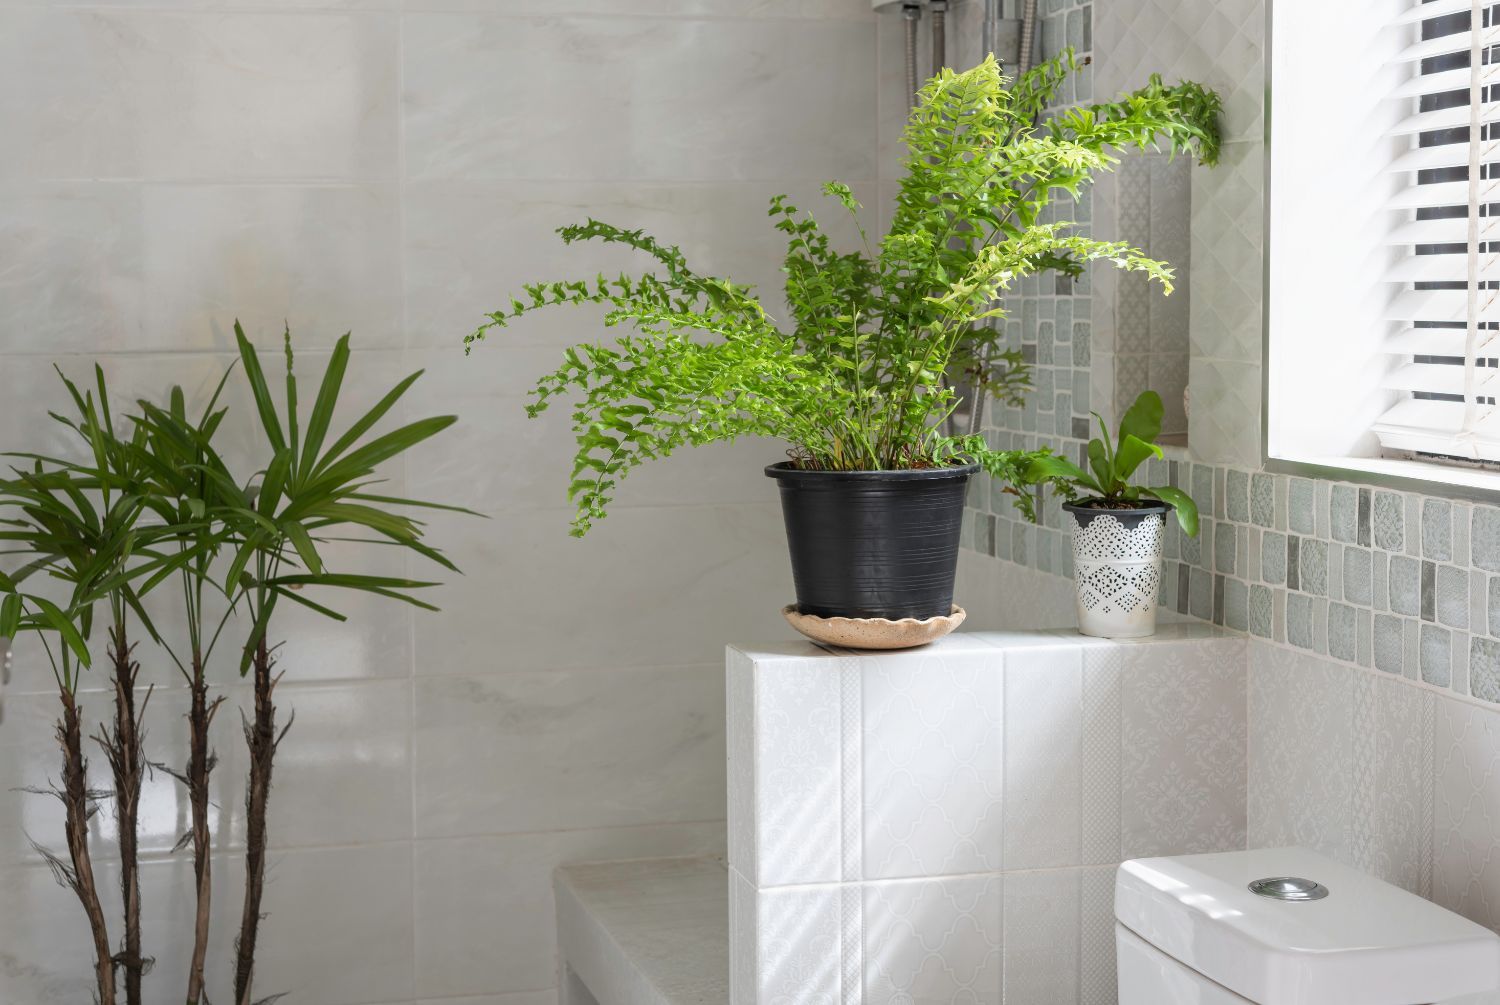 image of bathroom plants in grey tiled bathroom sat on shelf dividing wall next to toilet and window